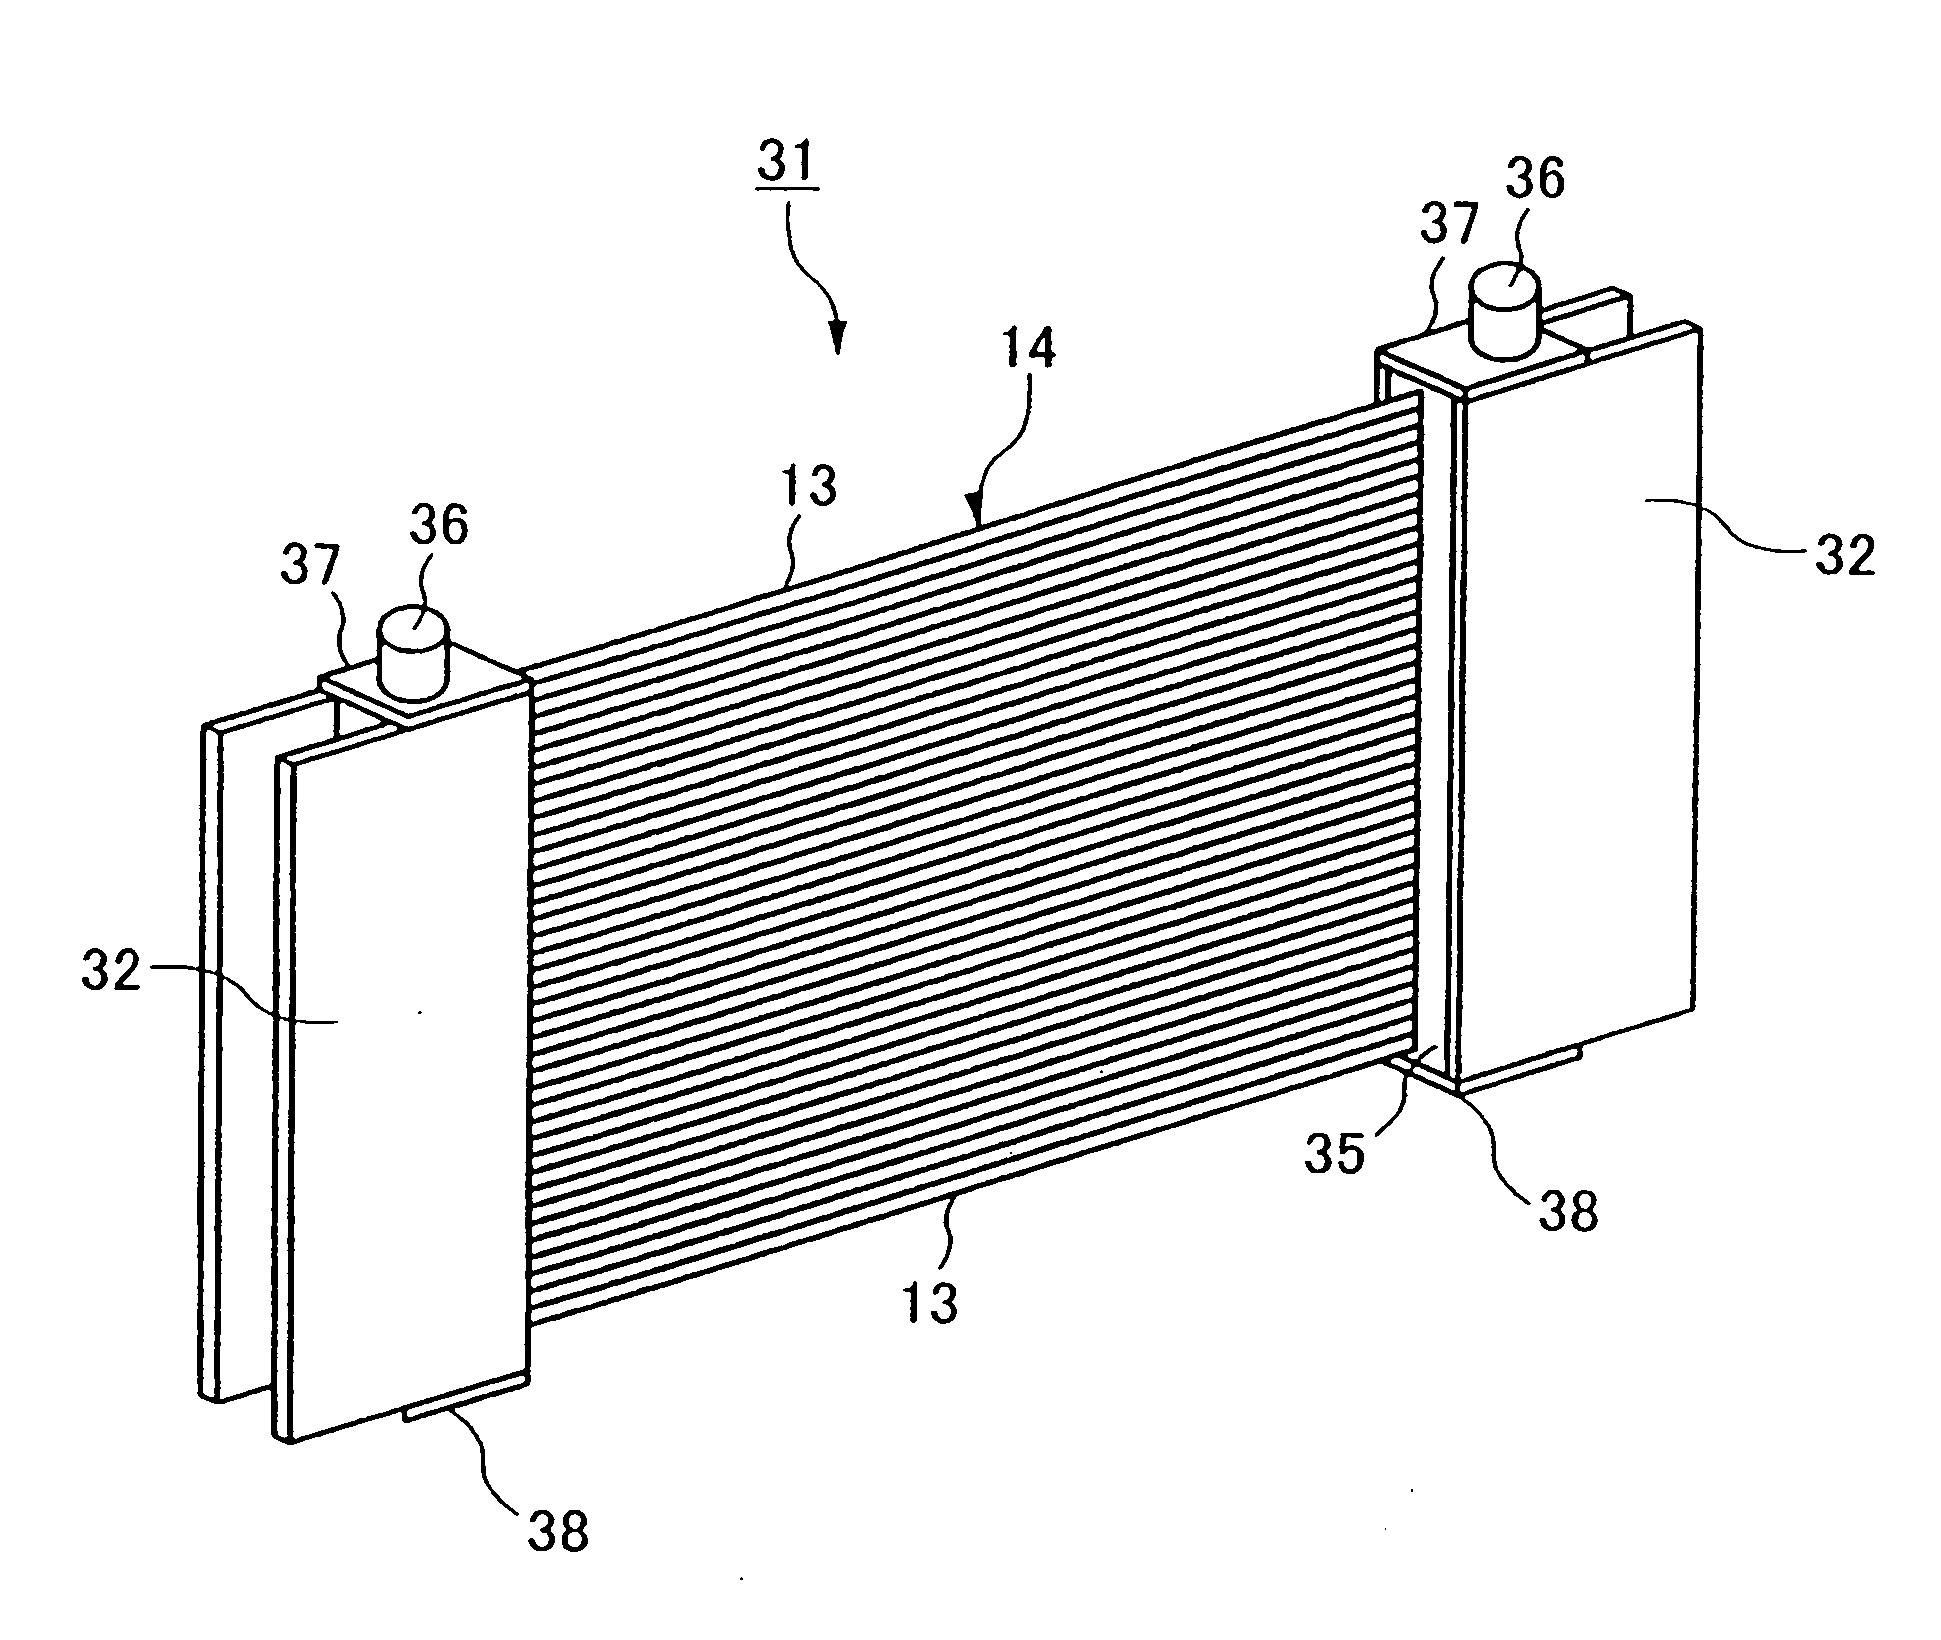 Hollow fiber membrane module, and a manufacturing method therefor, and housing for hollow fiber memberane module